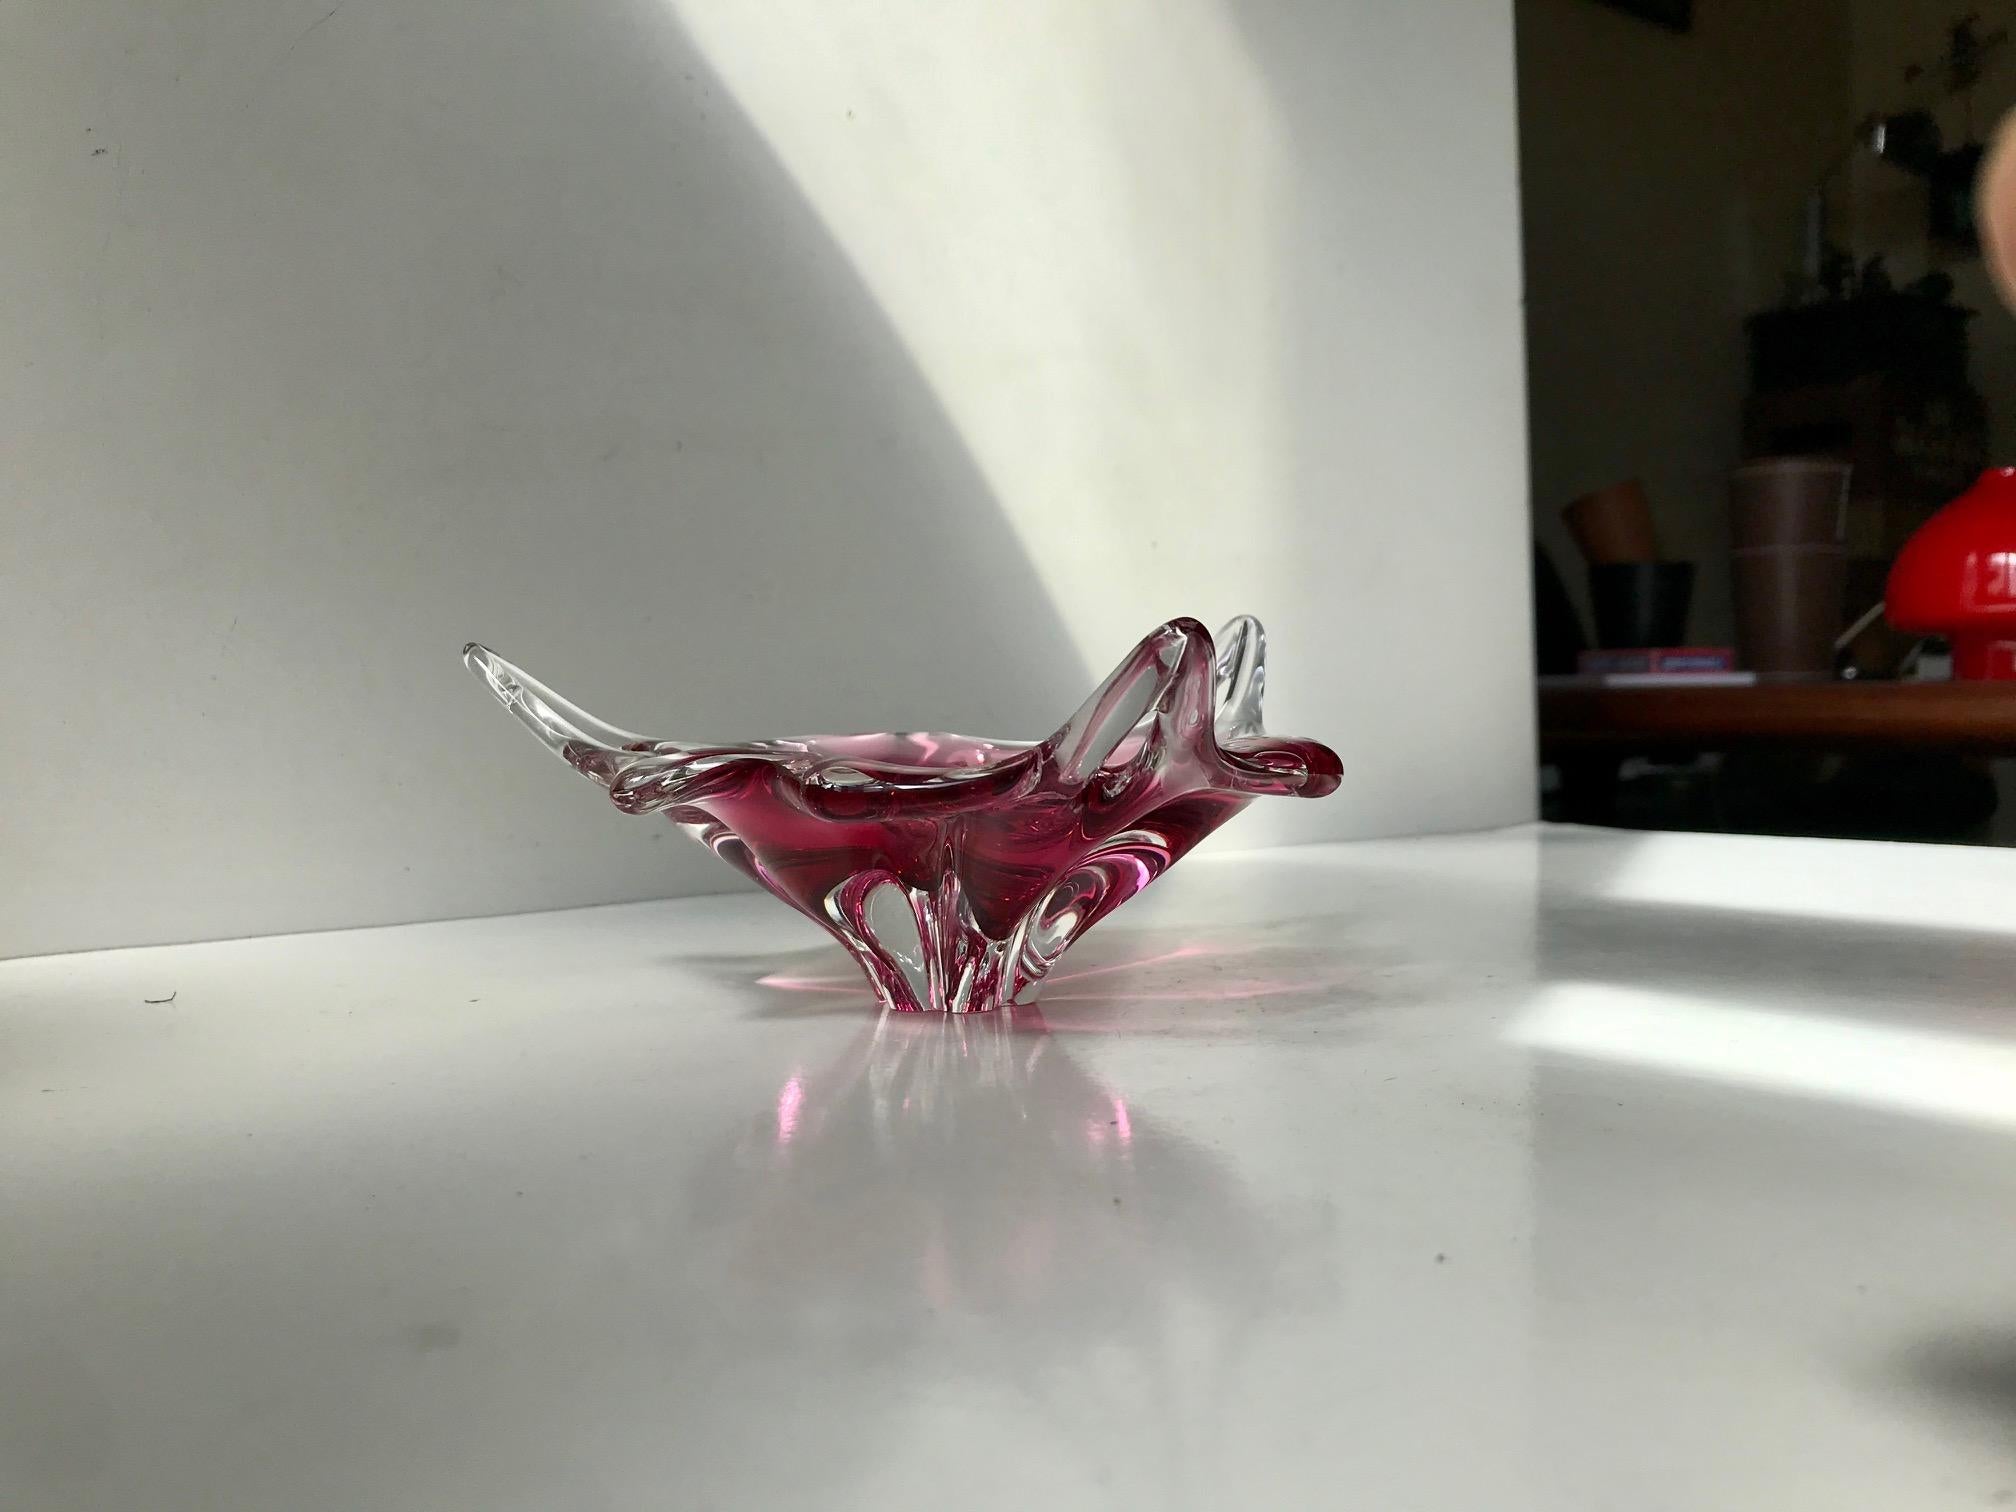 Hand blown organically shaped art glass dish or bowl in cased pink and clear hand blown glass. Designed and manufactured at Seguso in Murano Italy, circa 1950s-1960s.